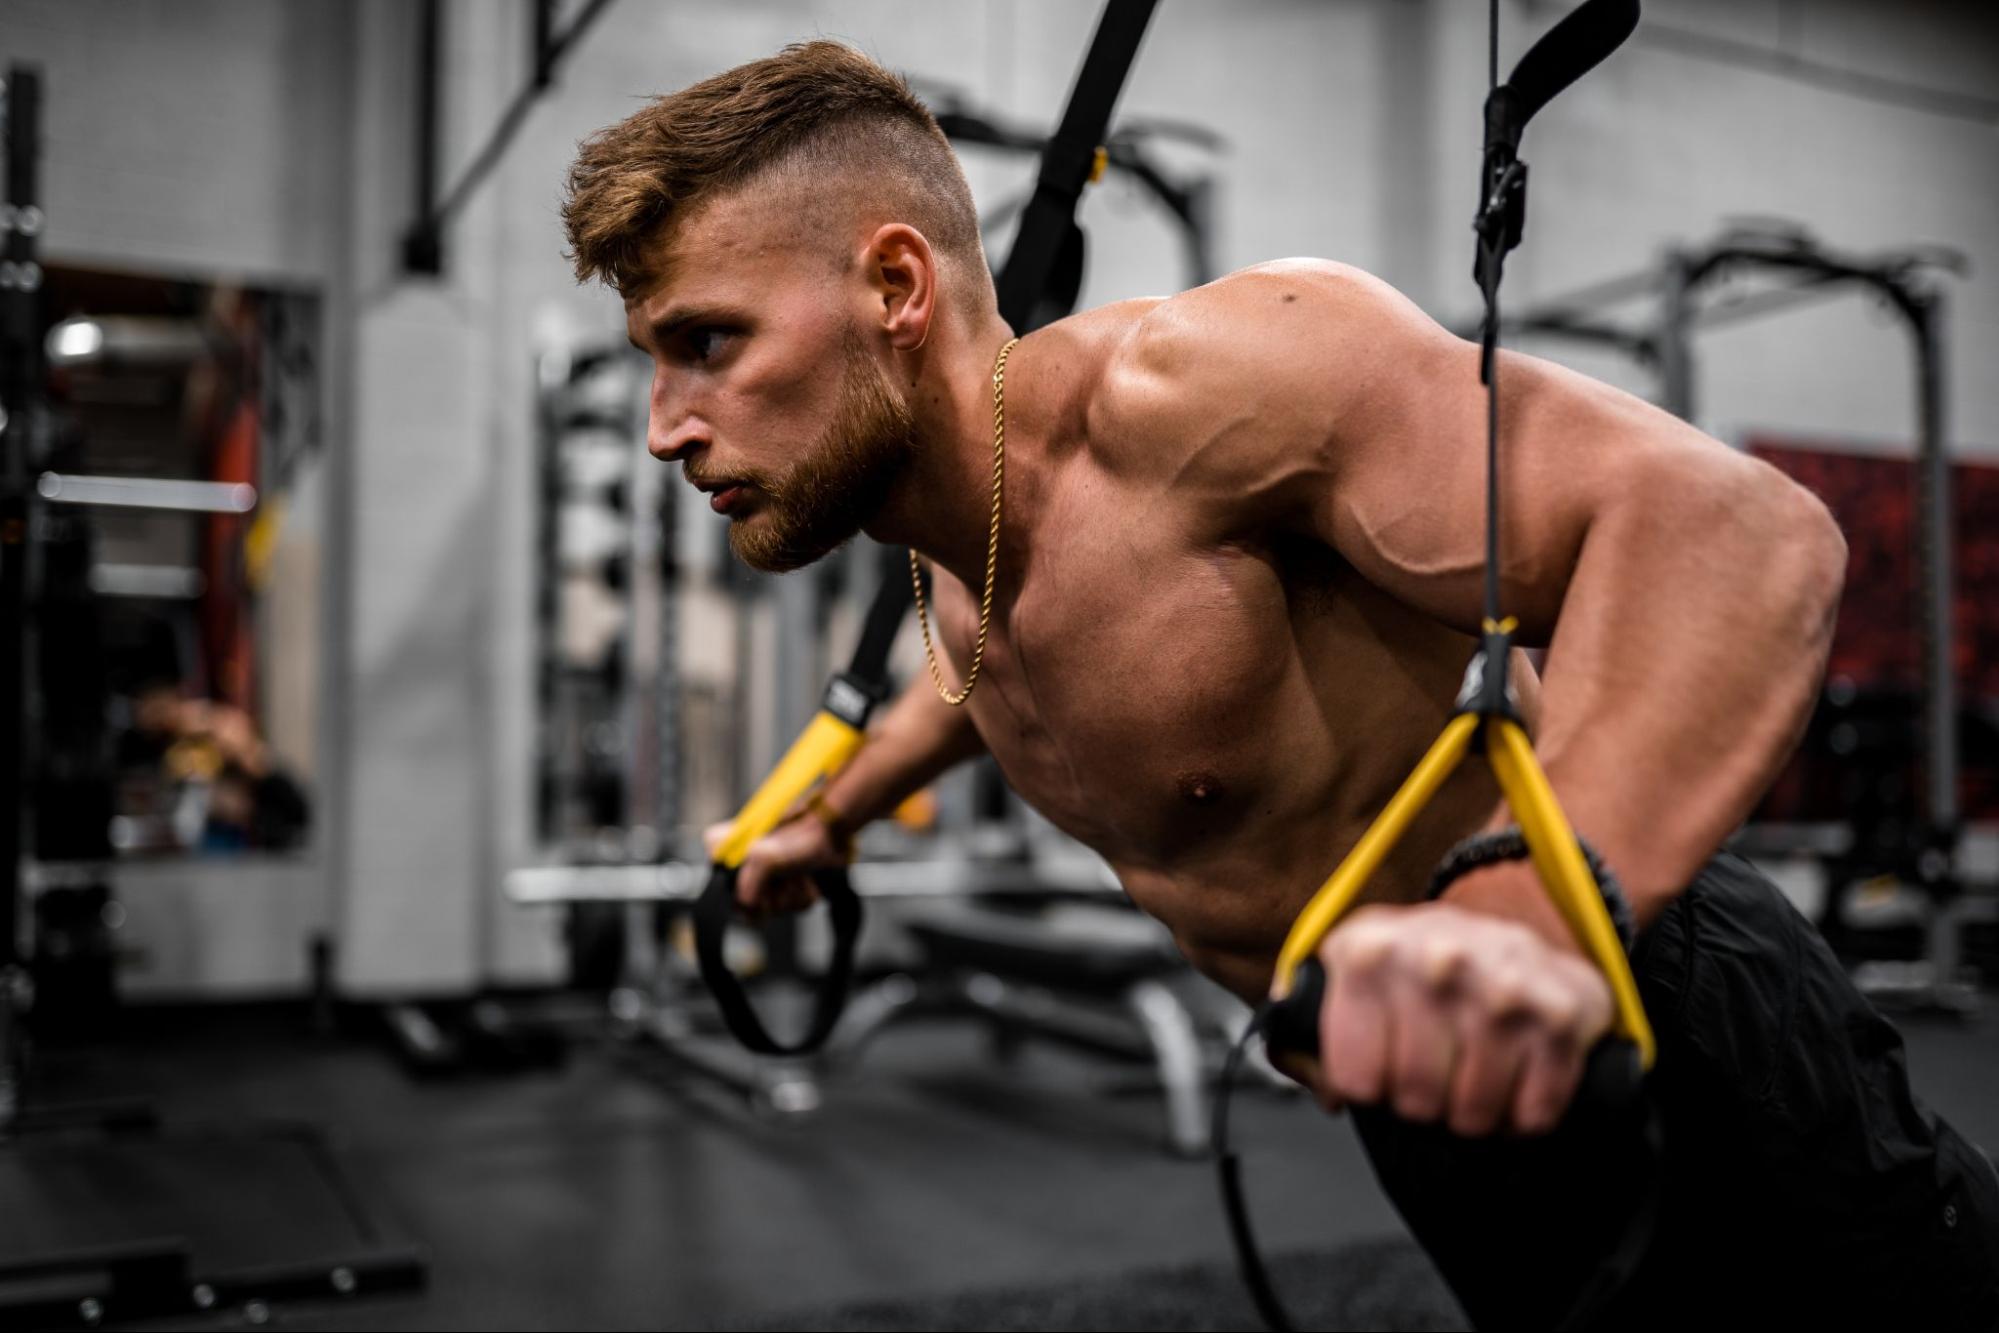 Athlete powered by two protein shakes a day is performing push-ups using yellow resistance bands to strengthen his arms and upper body